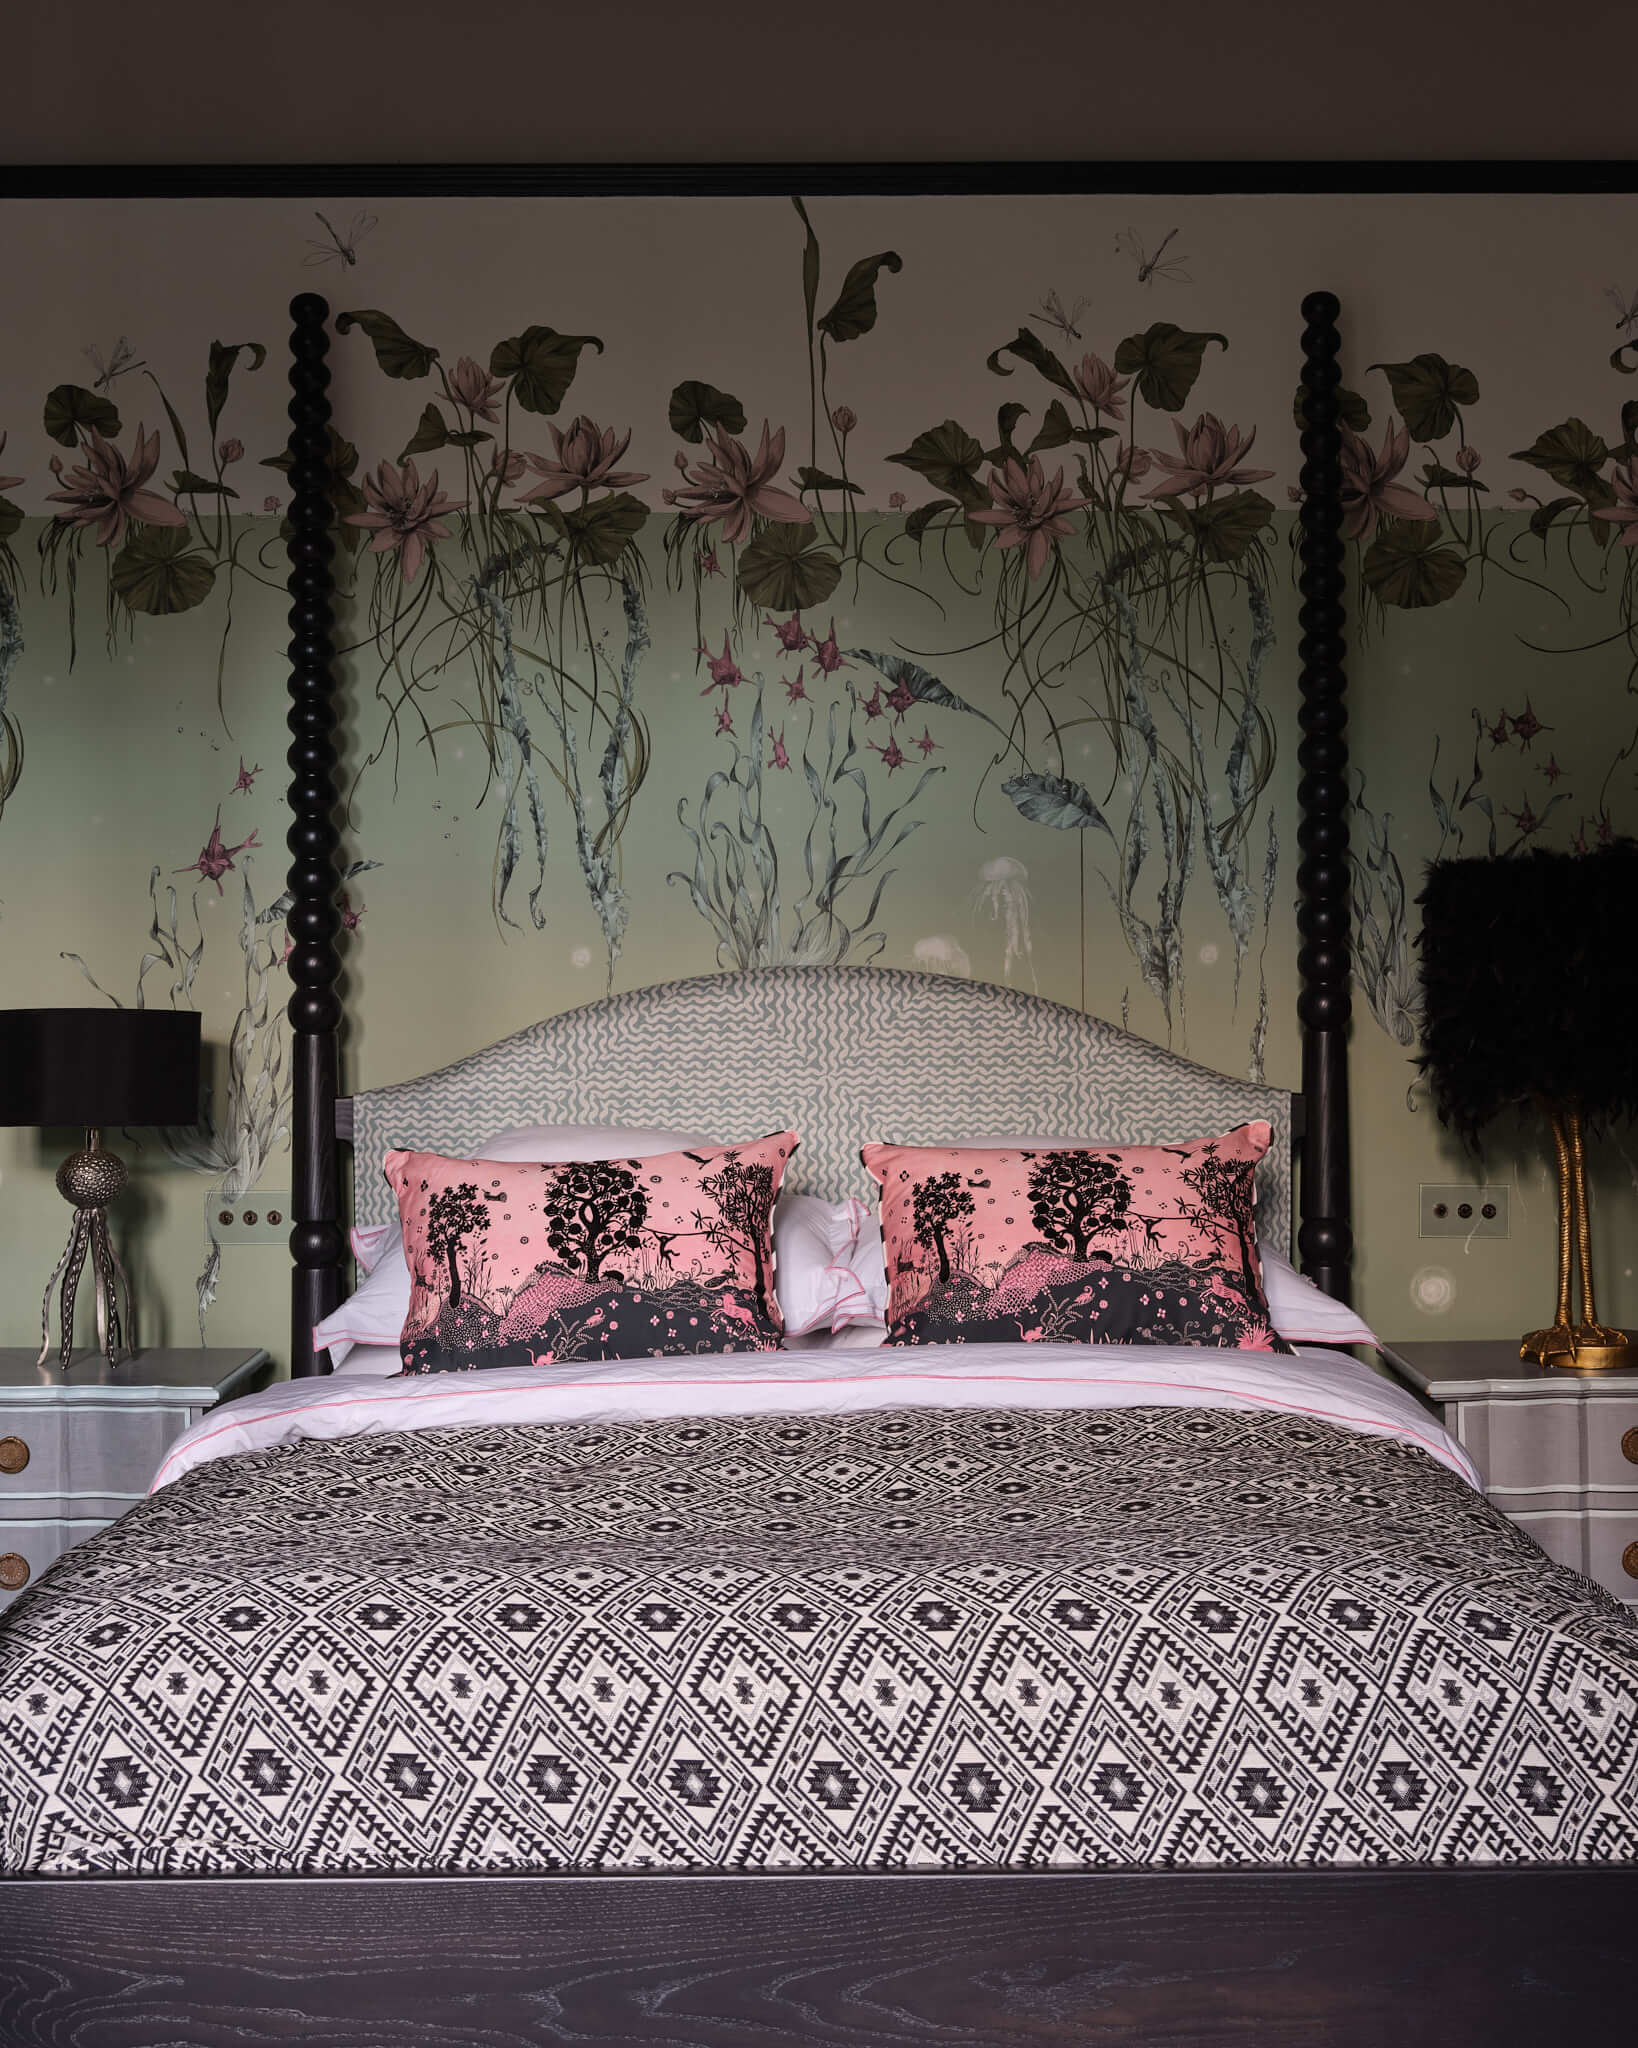 High Victorian Gothic Rectory interior bed